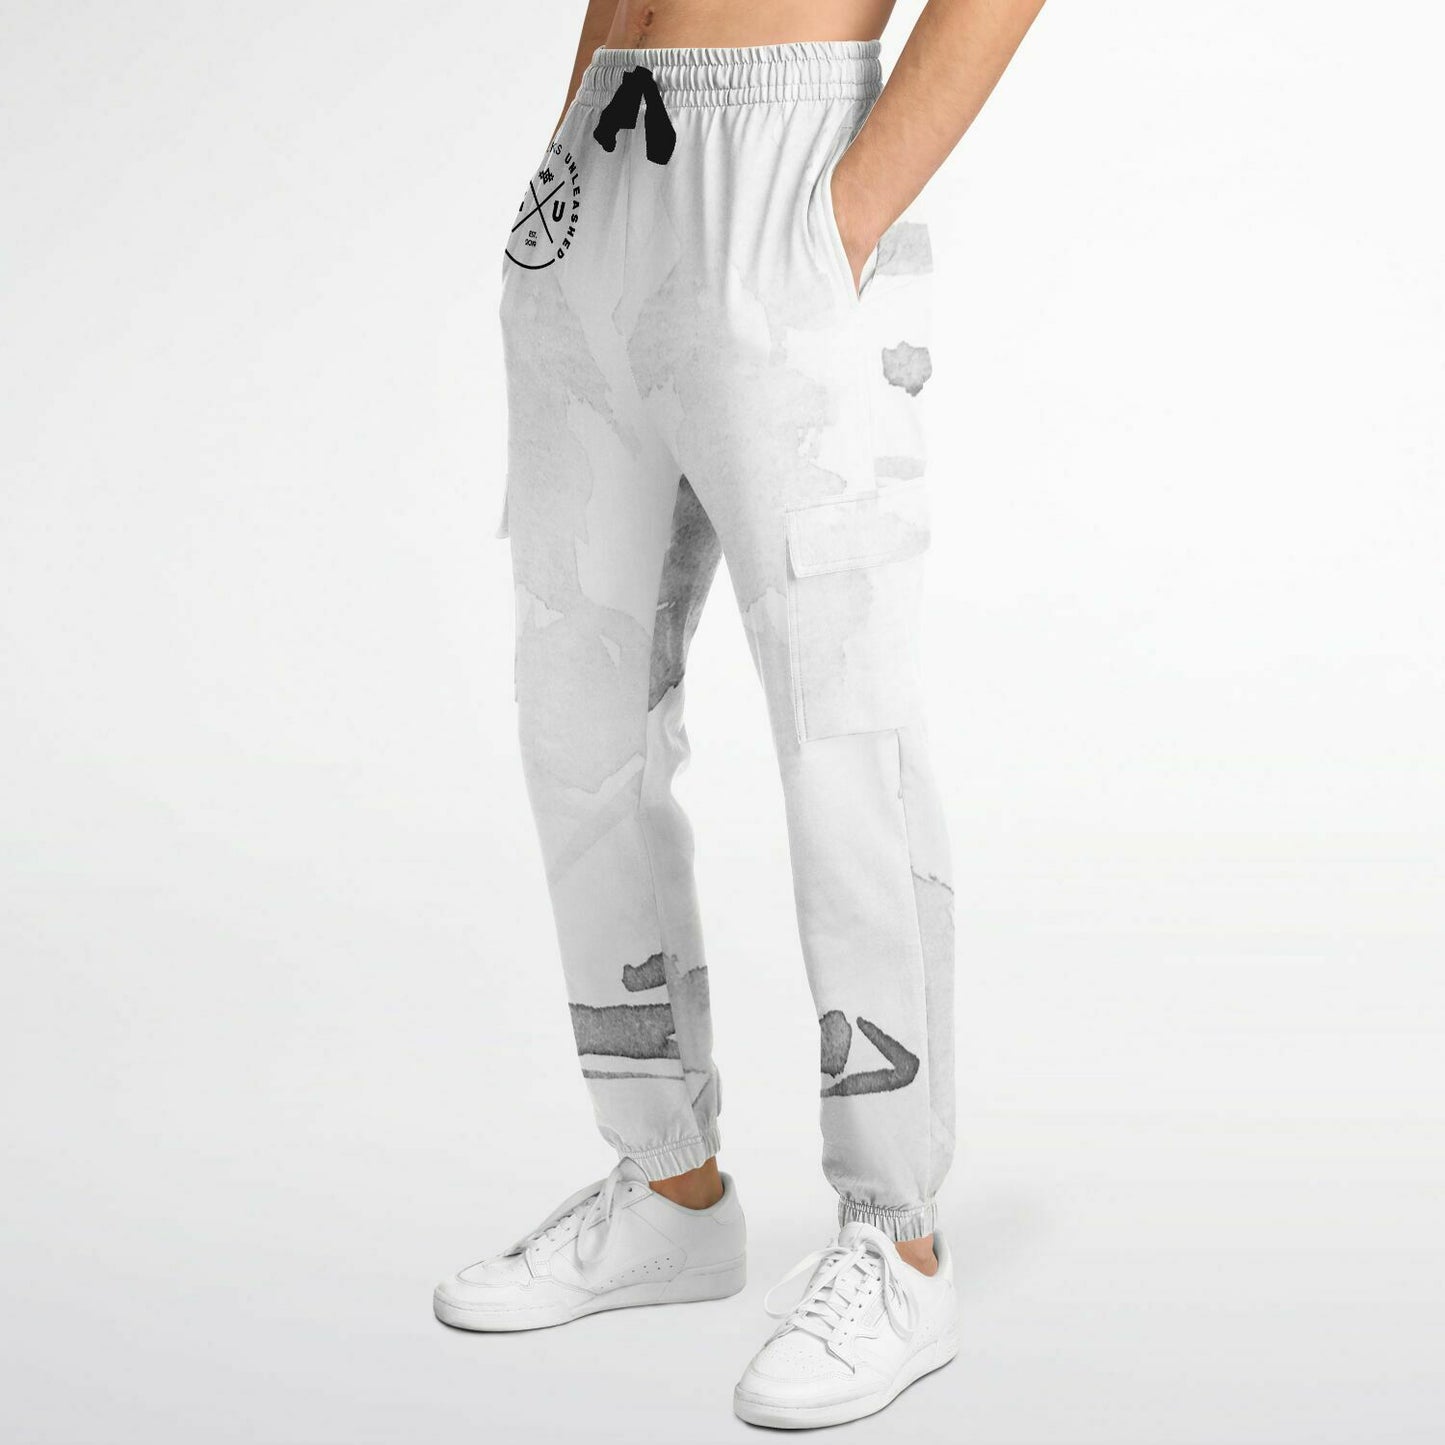 All Over Print Fashion Cargo Pants